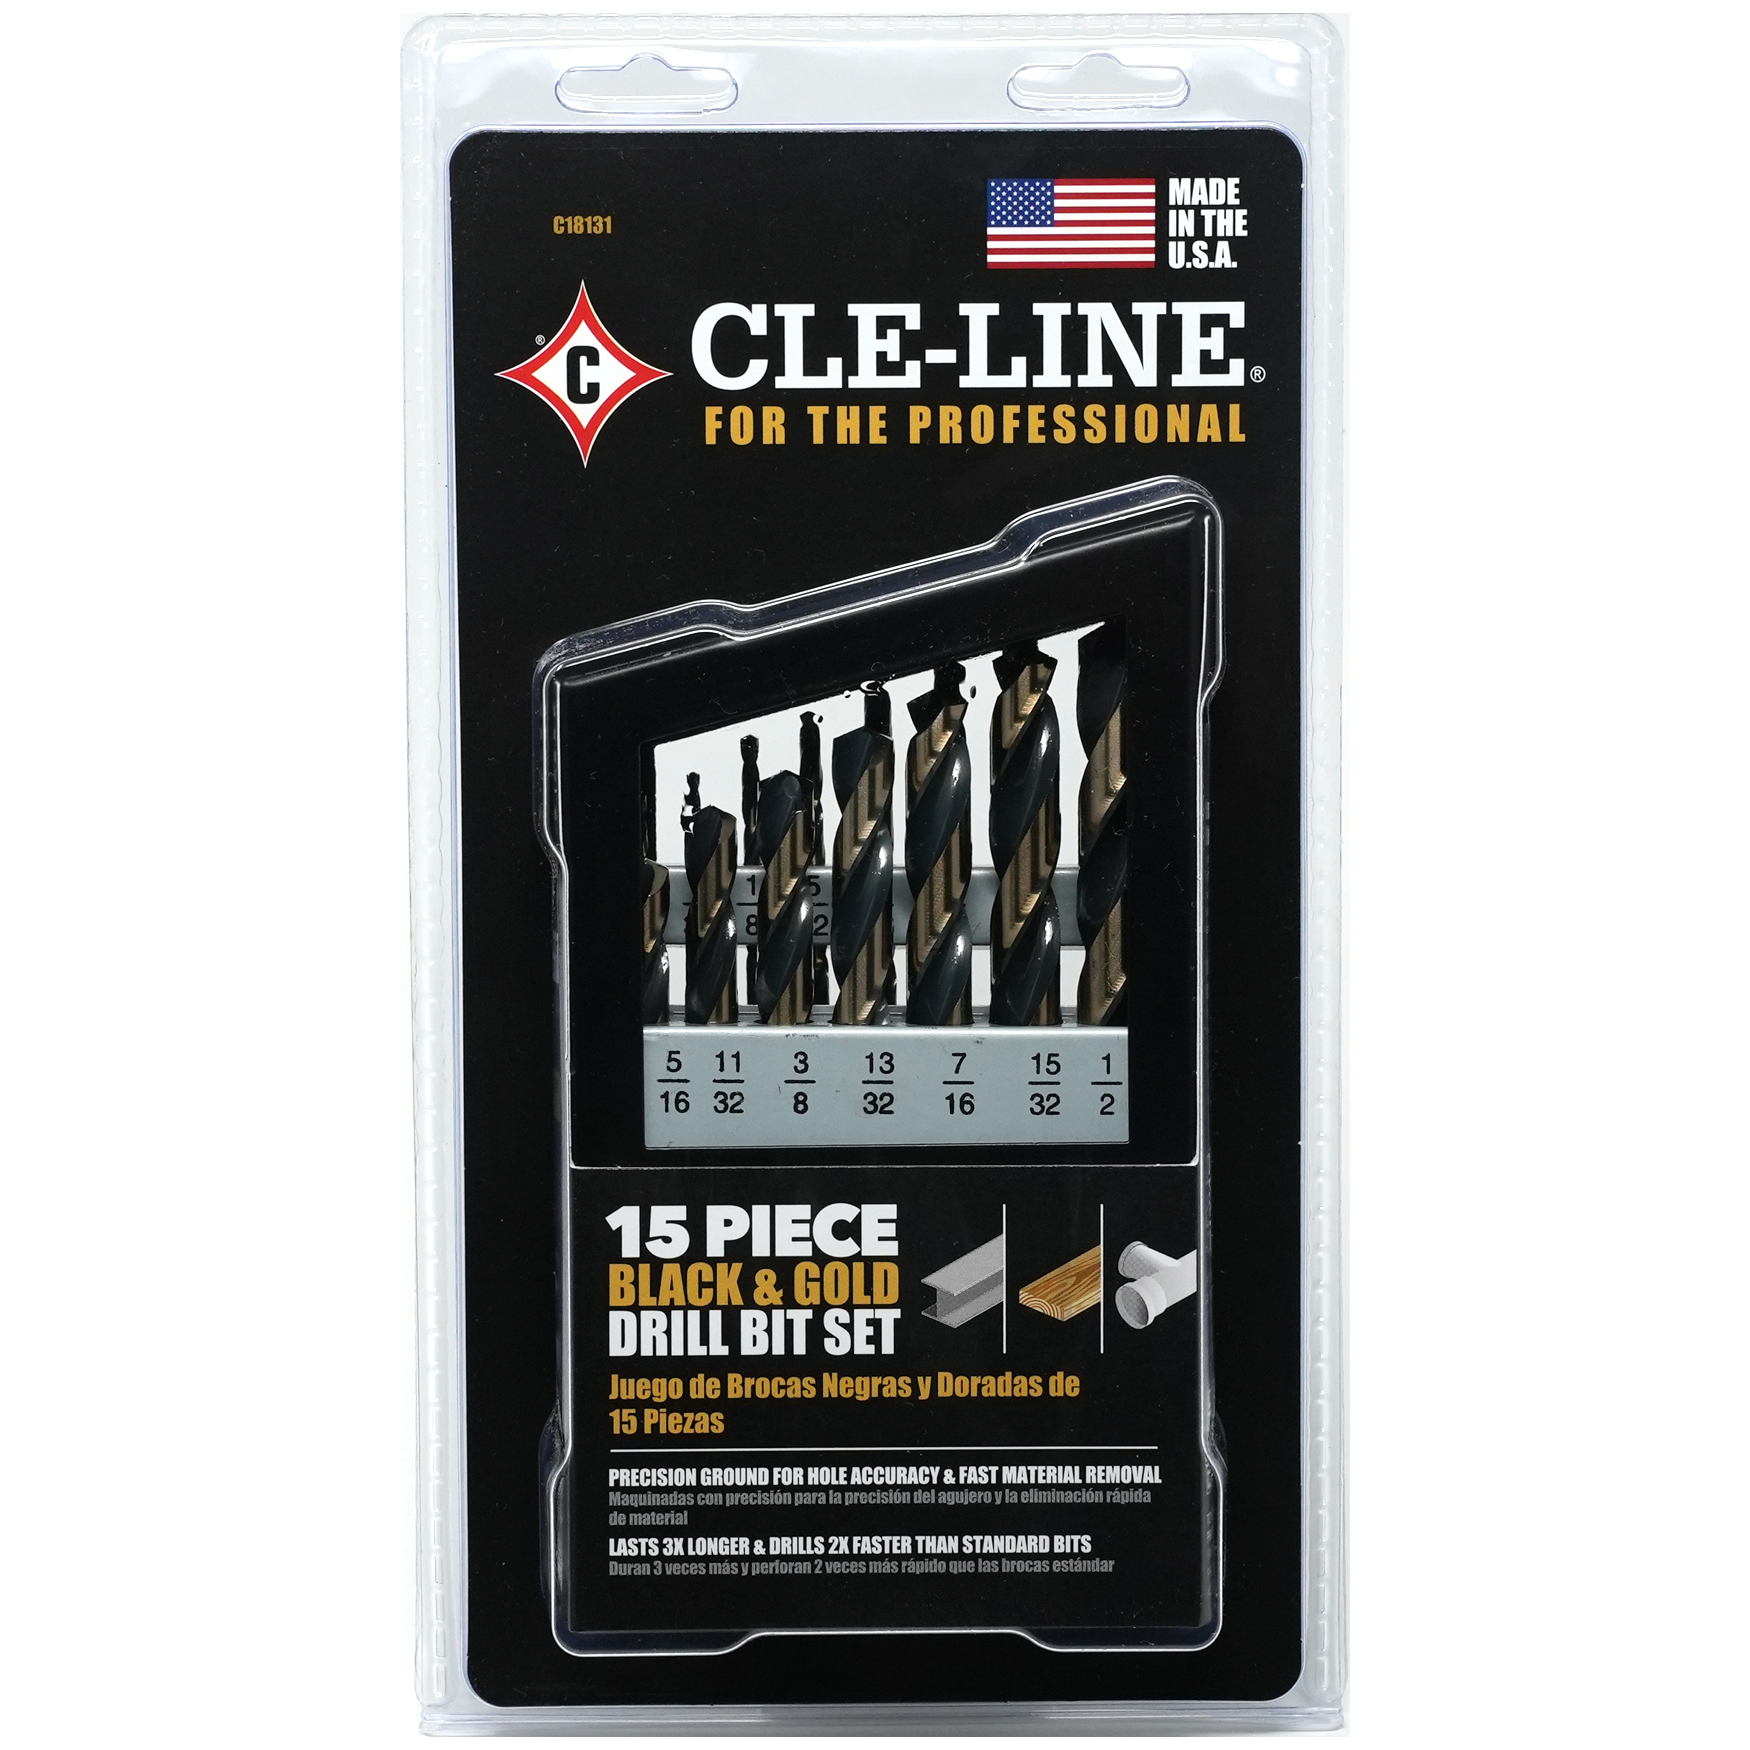 Cle-Line C18131 Black and Gold High Speed Drill Bit Set (15-Piece)